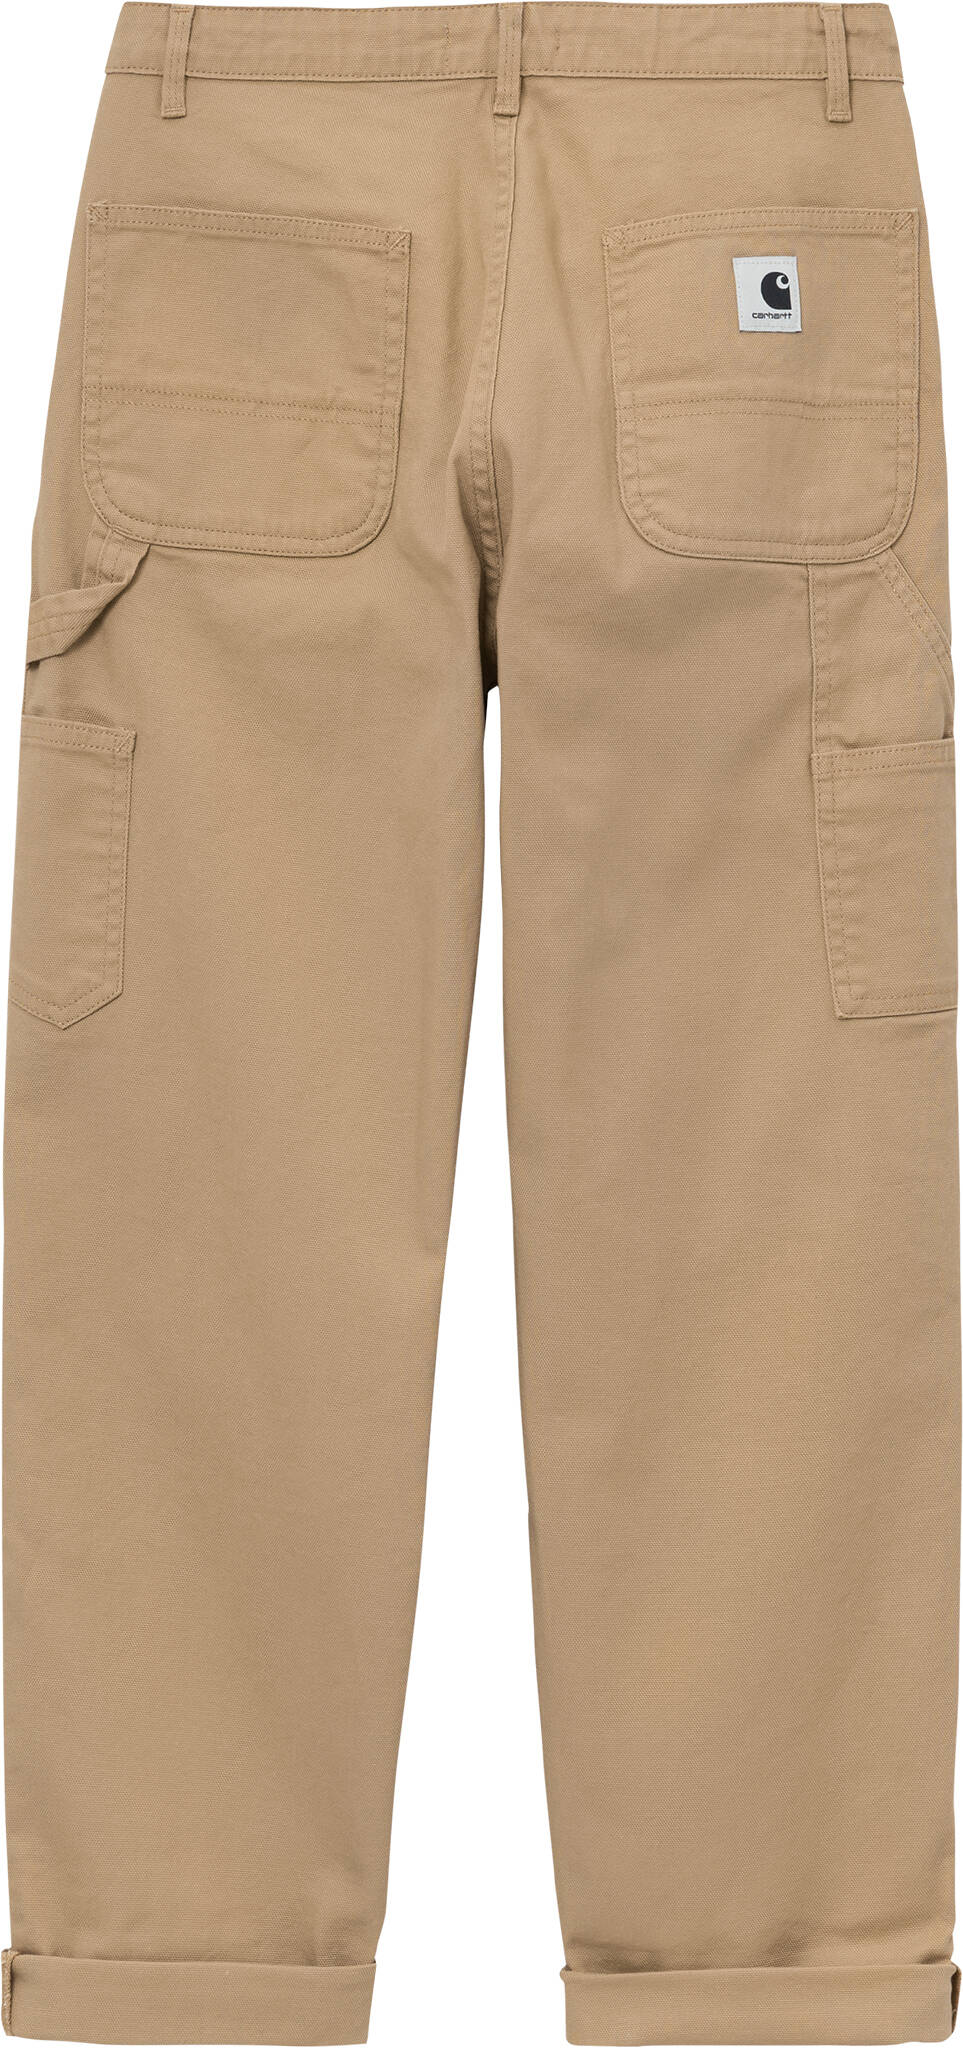 This exact carhartt style pants for women? : r/findfashion